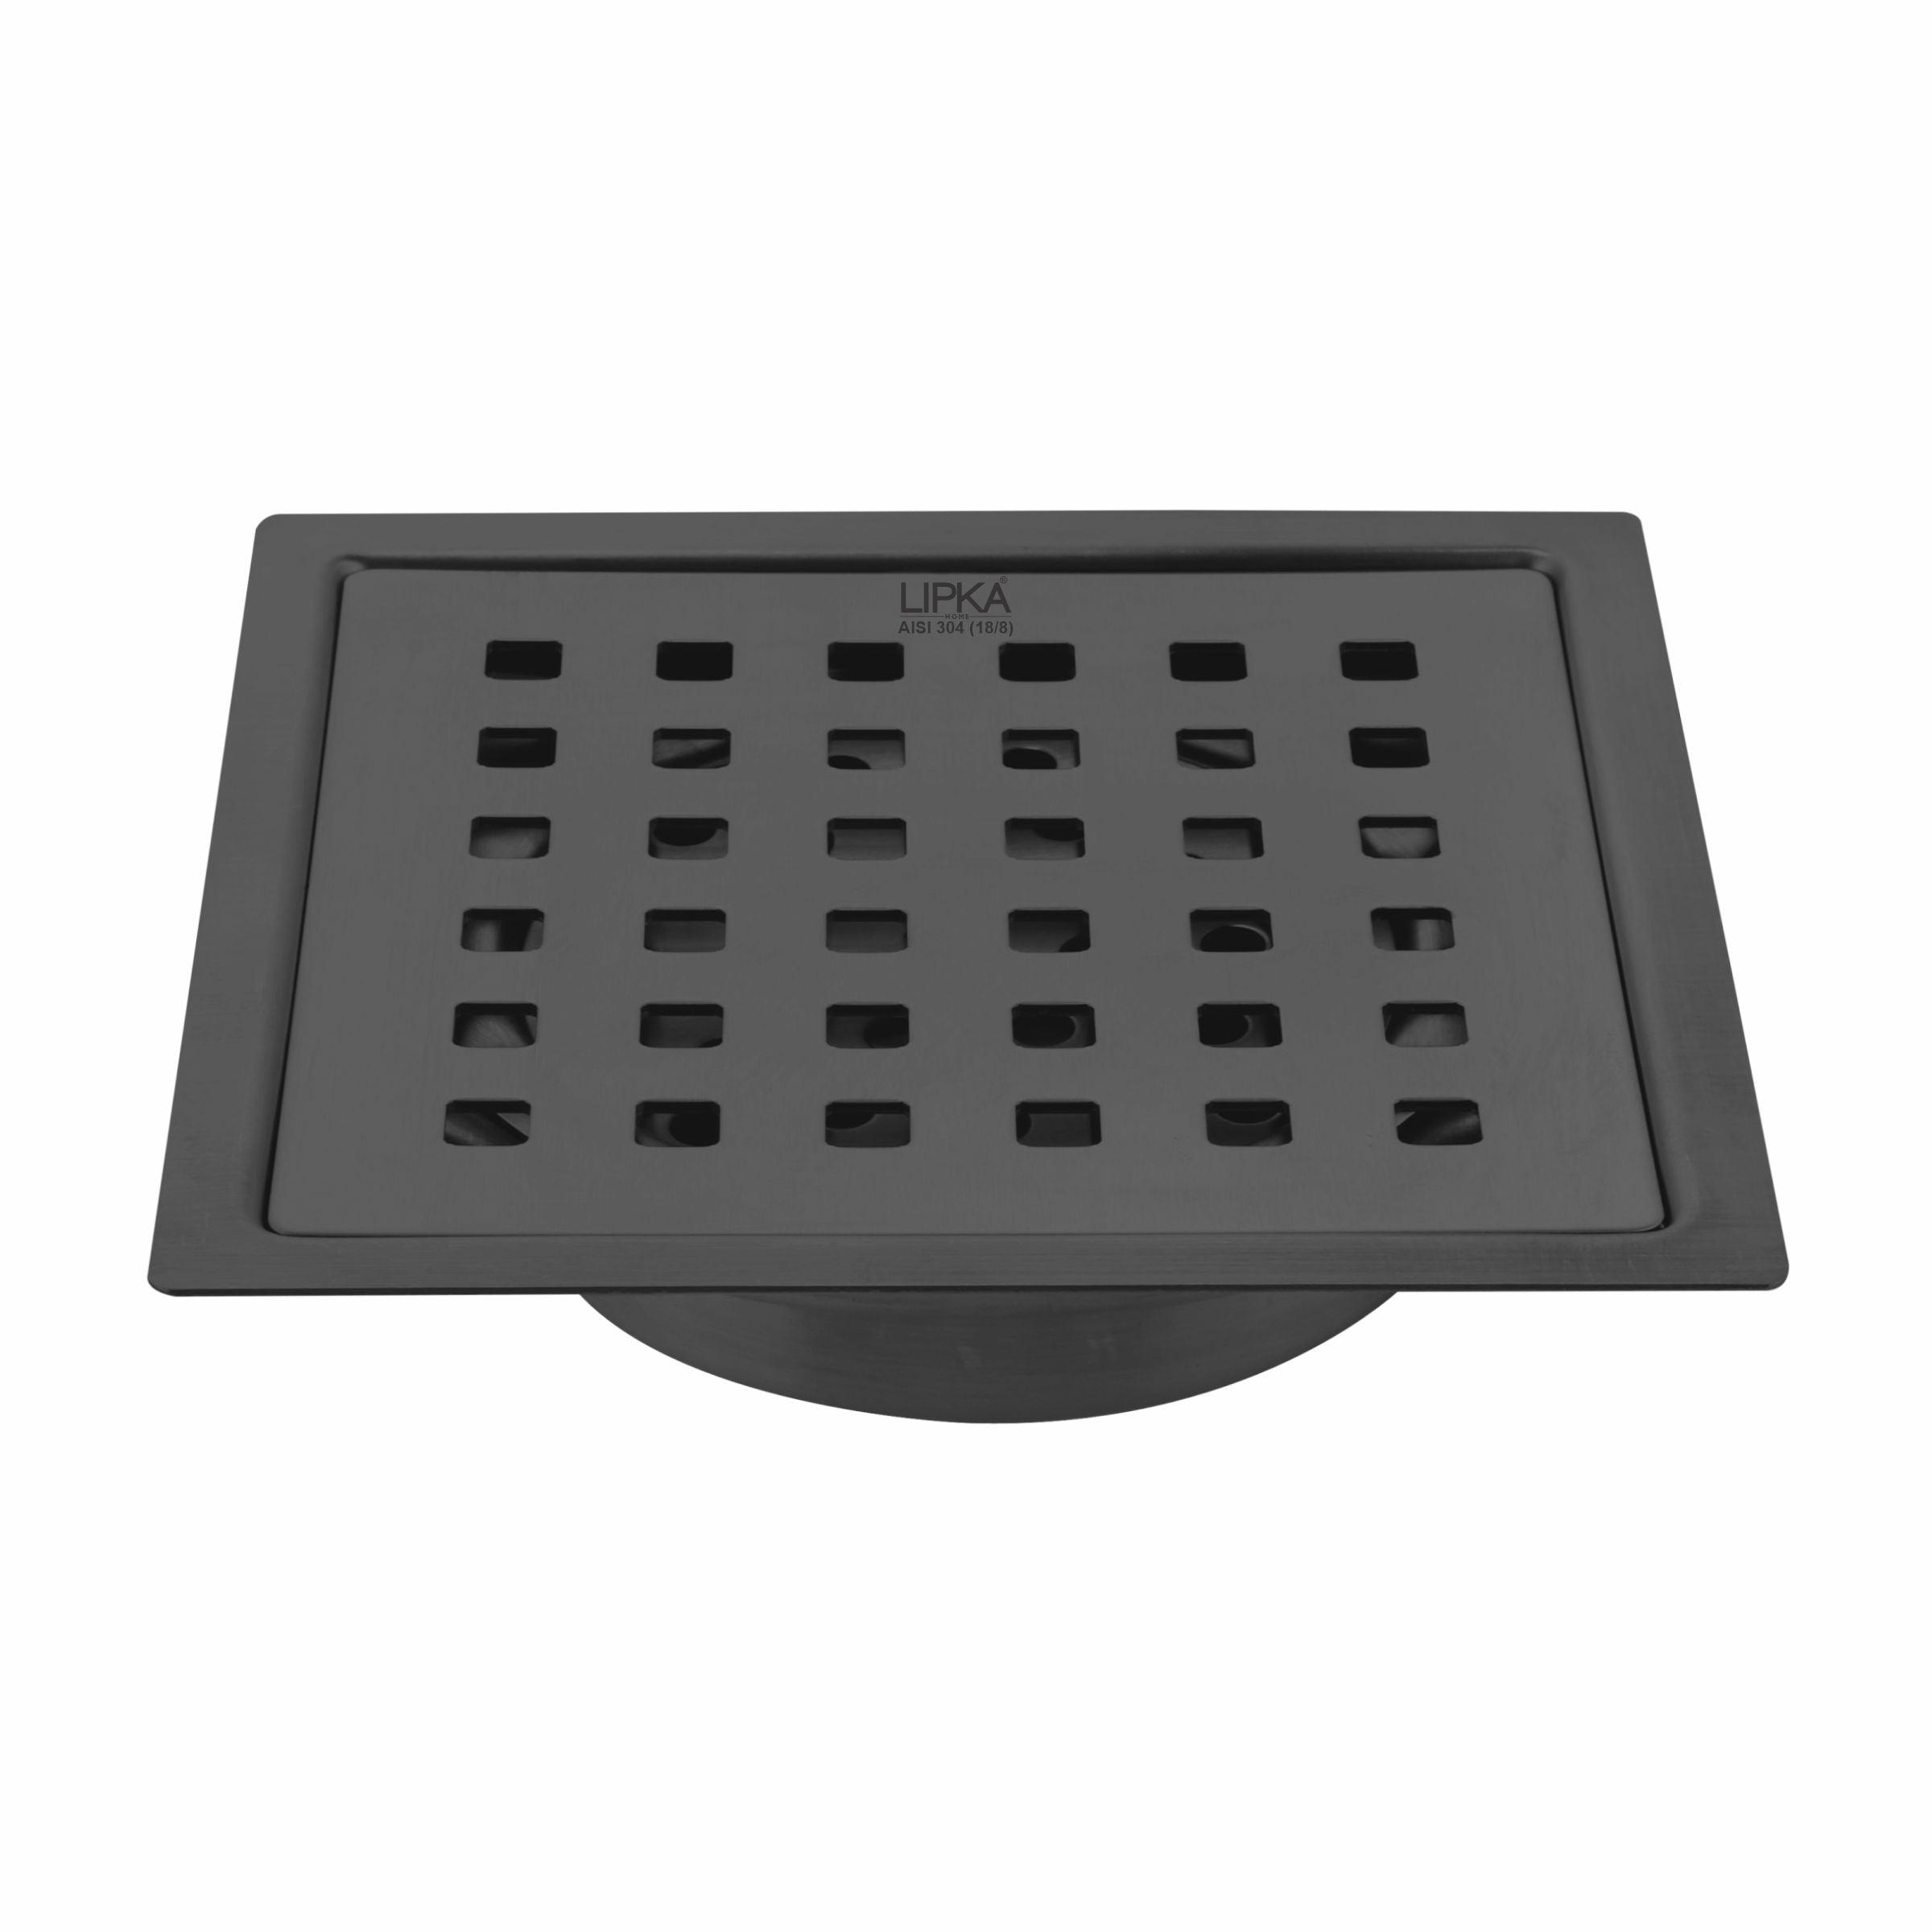 Red Exclusive Square Flat Cut Floor Drain in Black PVD Coating (5 x 5 Inches) with Cockroach Trap